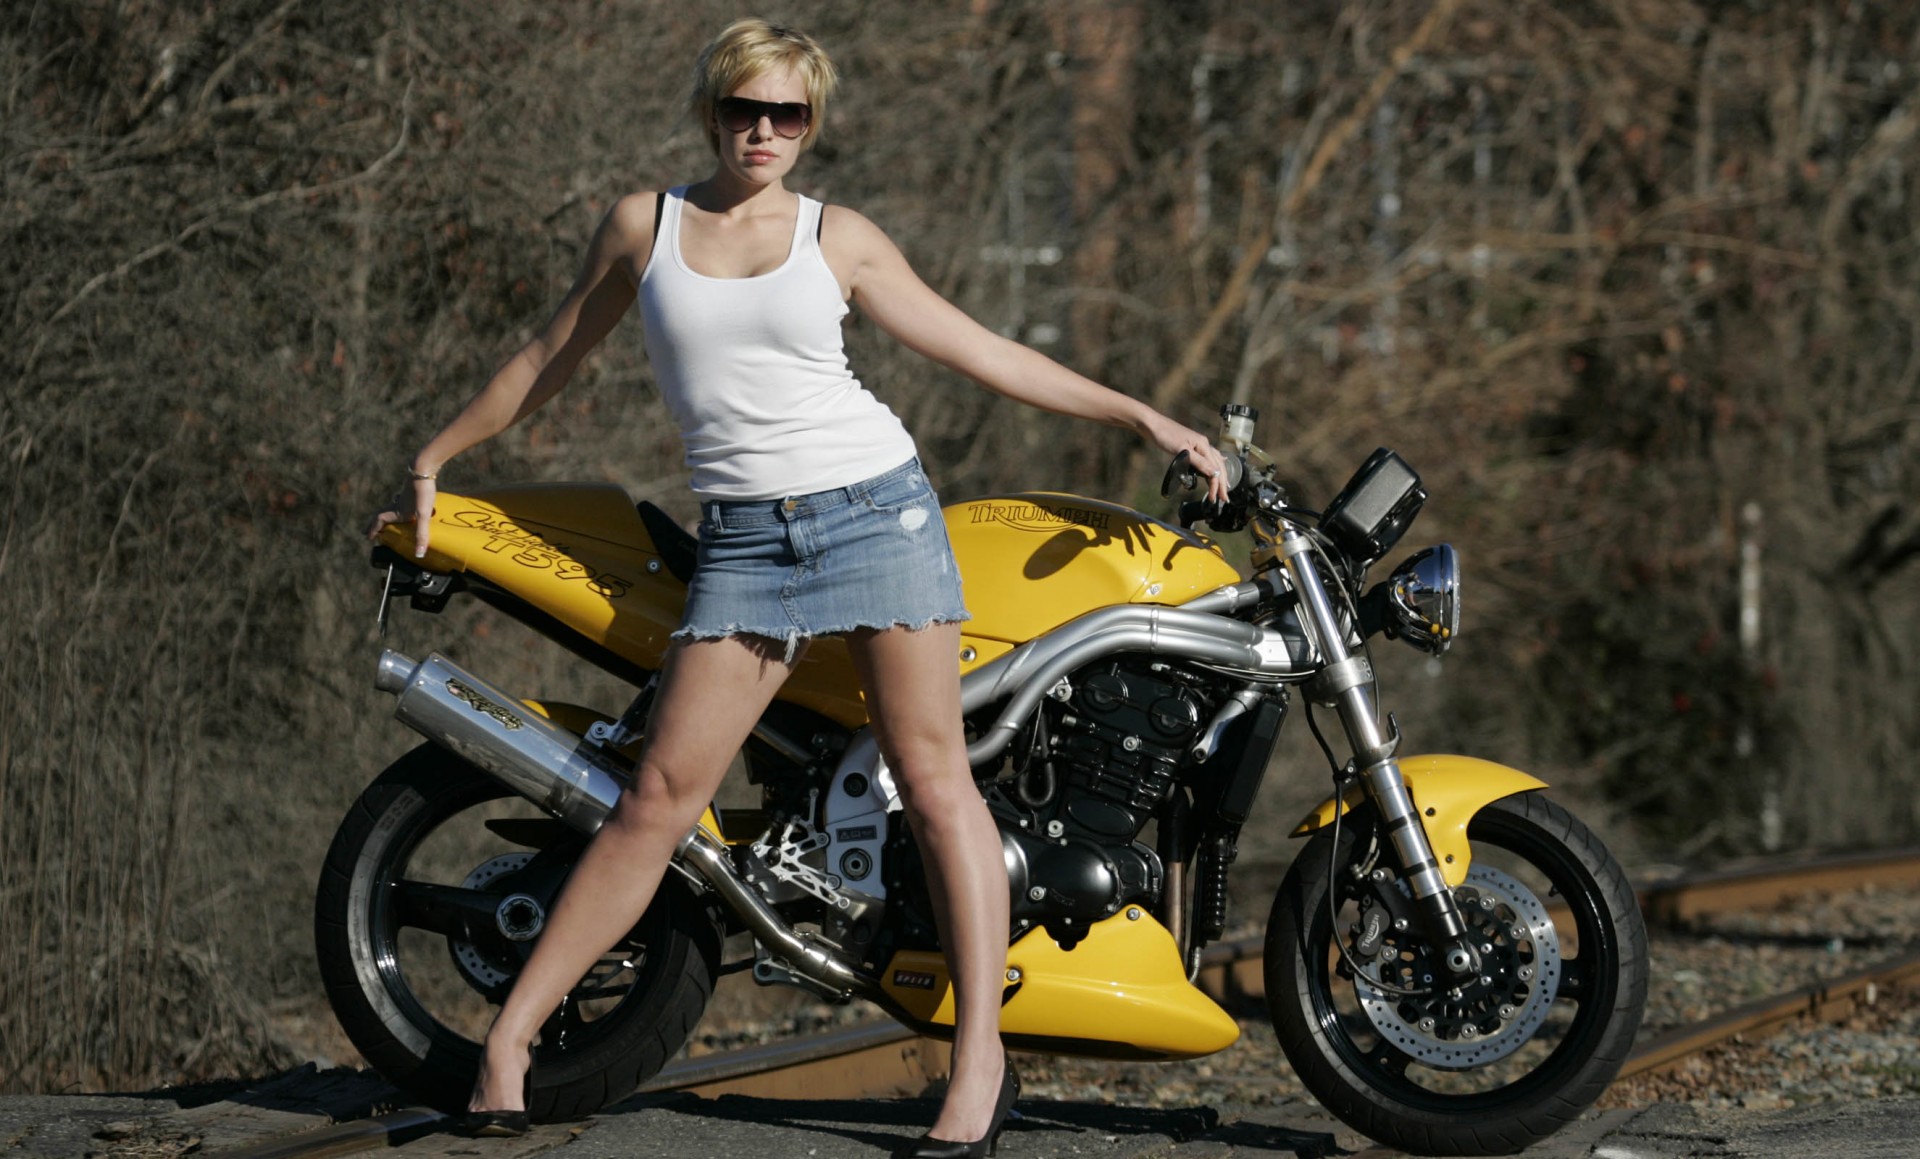 A girl in a denim mini skirt next to a yellow motorcycle wallpaper.